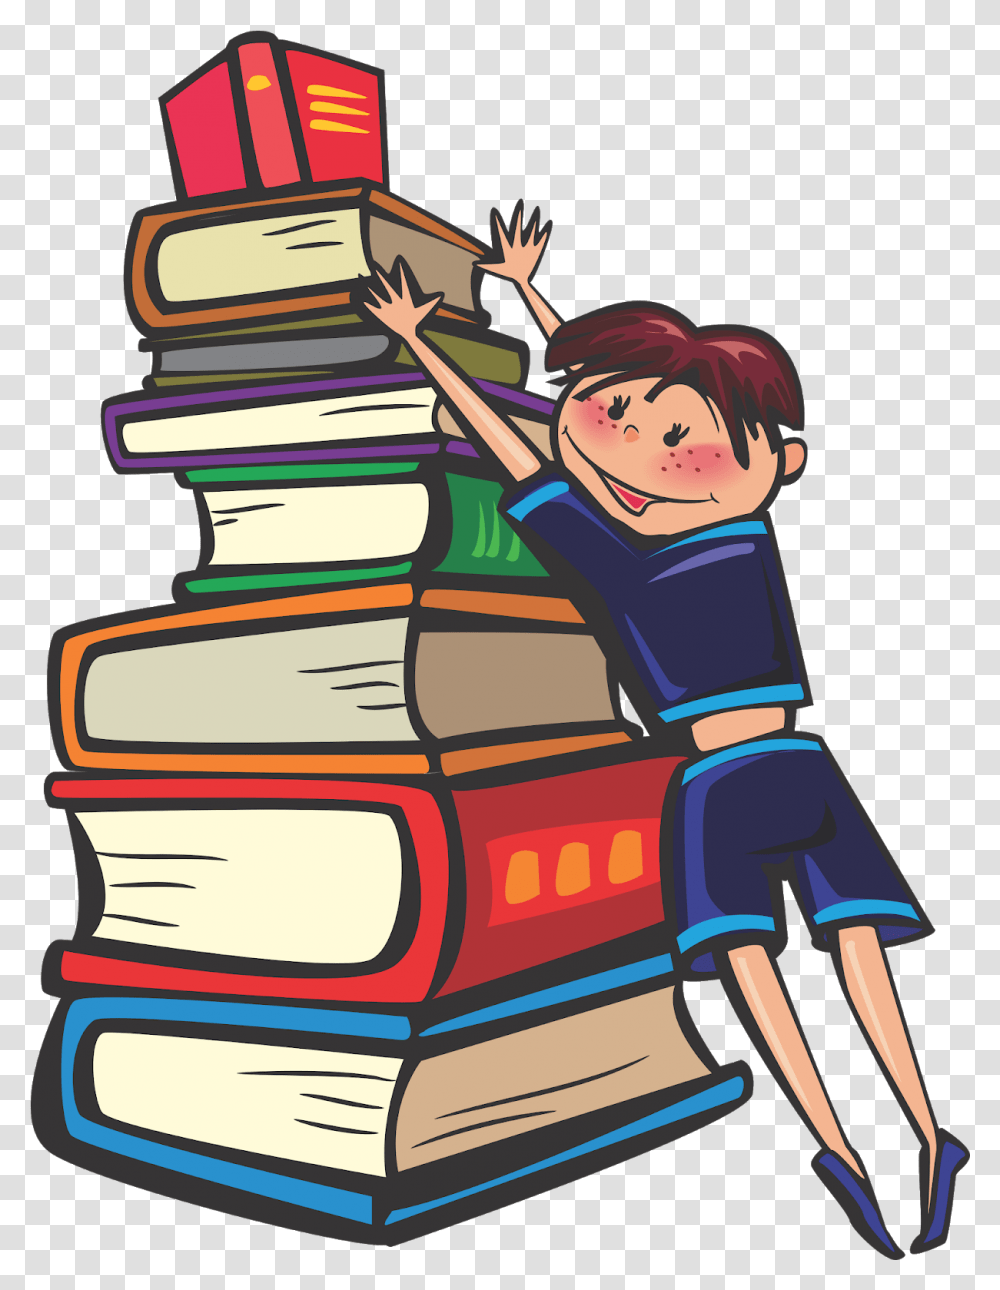 Download School And Education Stack Clipart, Clothing, Toy, Dress, Performer Transparent Png